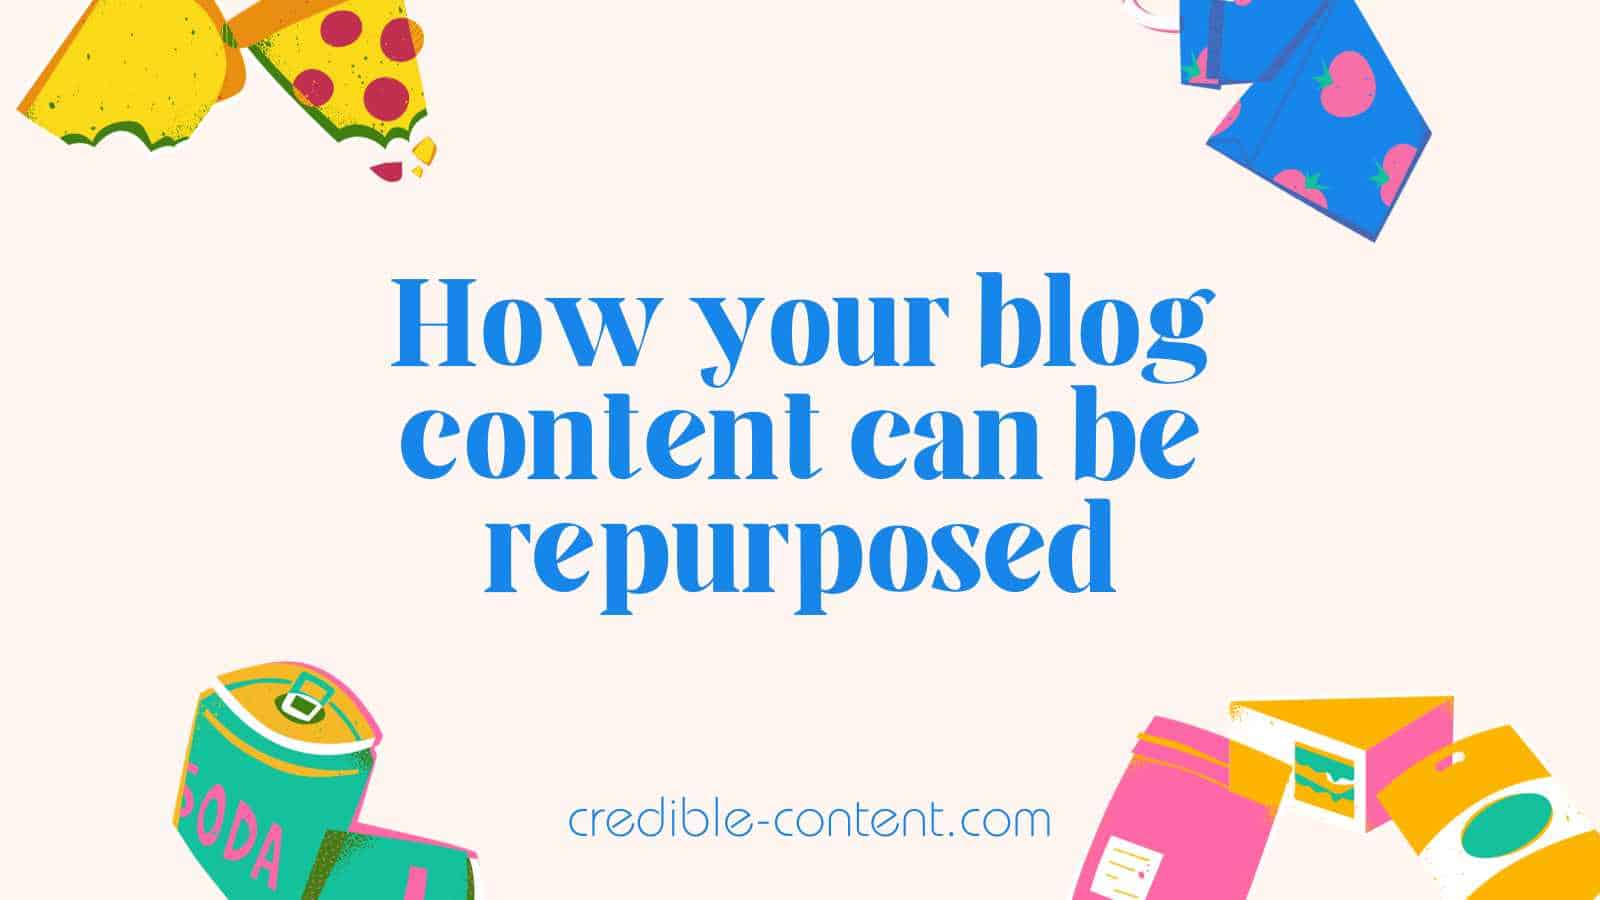 How your blog content can be repurposed